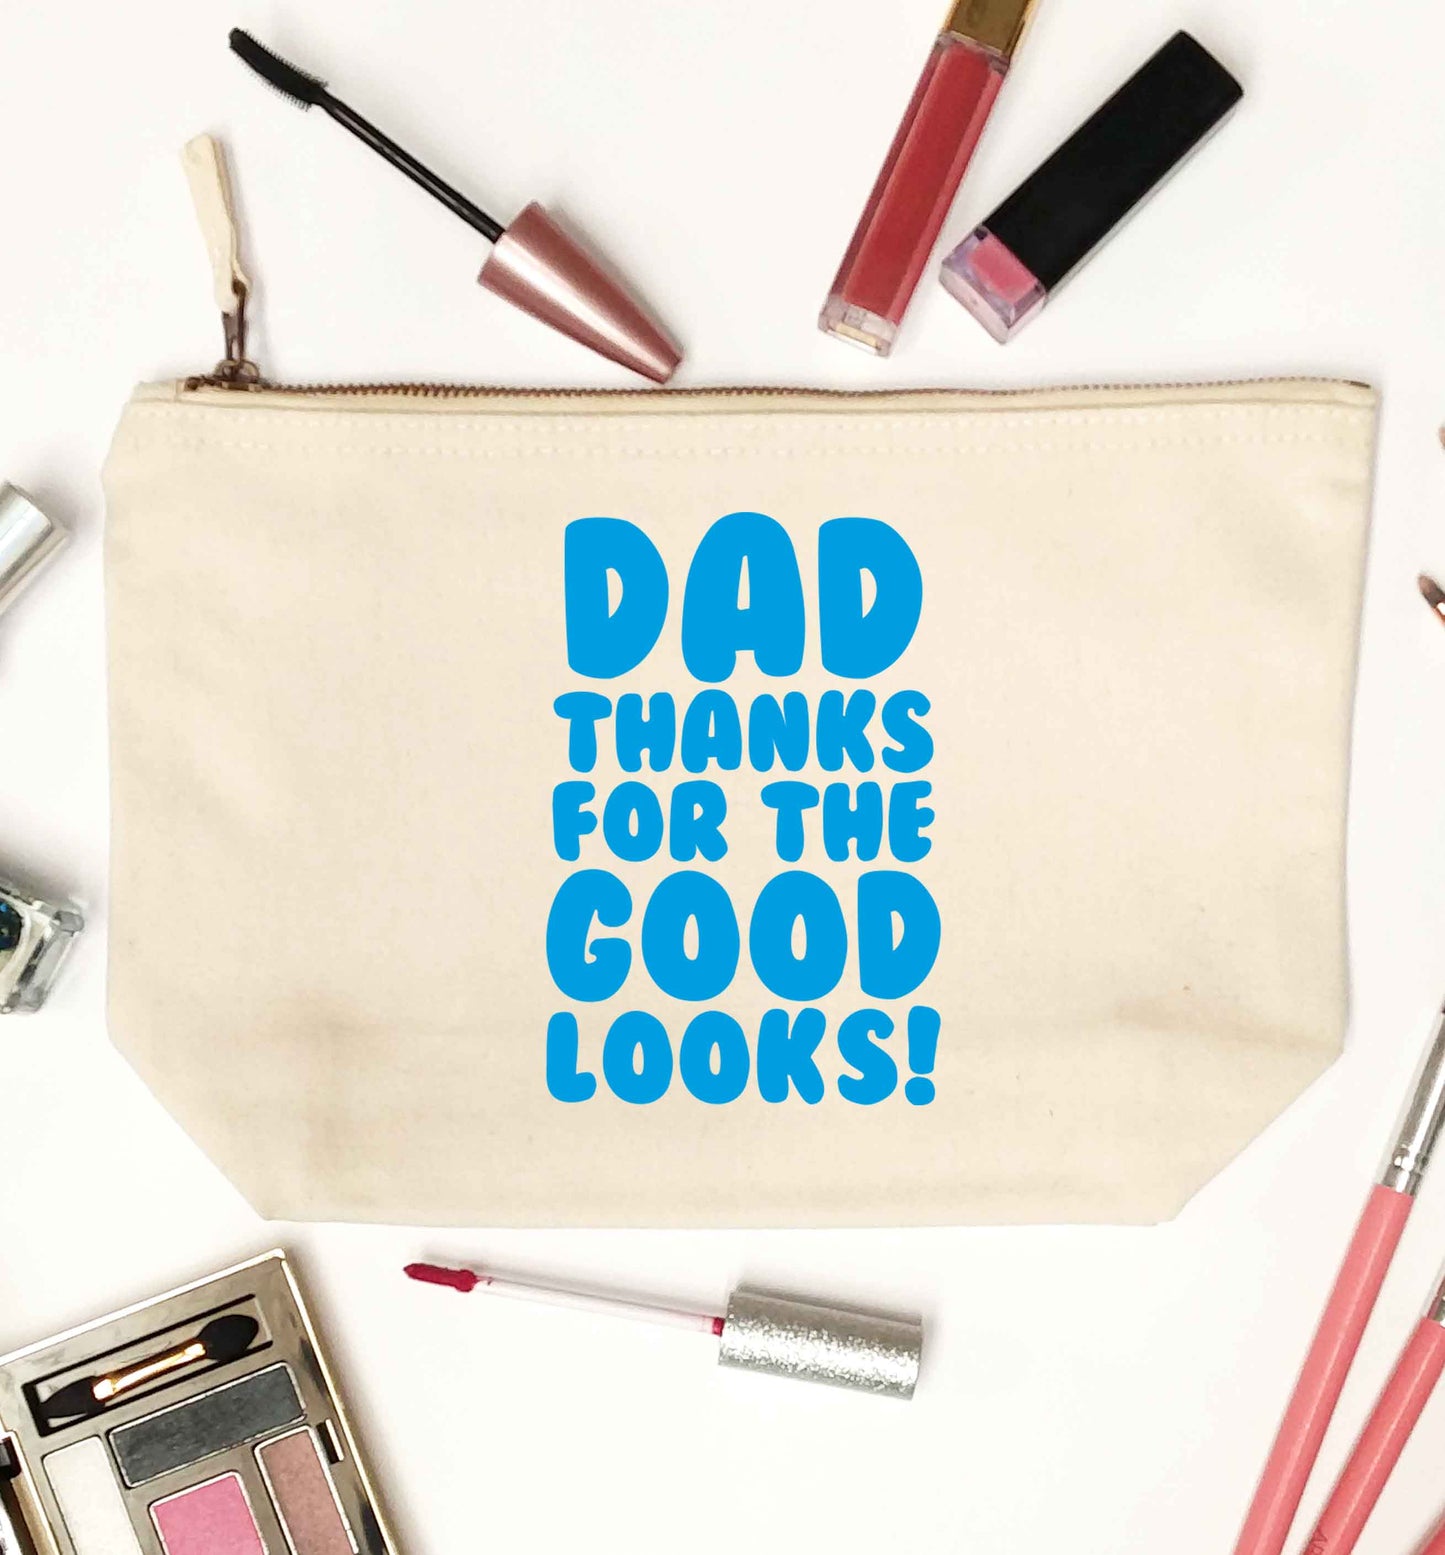 Dad thanks for the good looks natural makeup bag